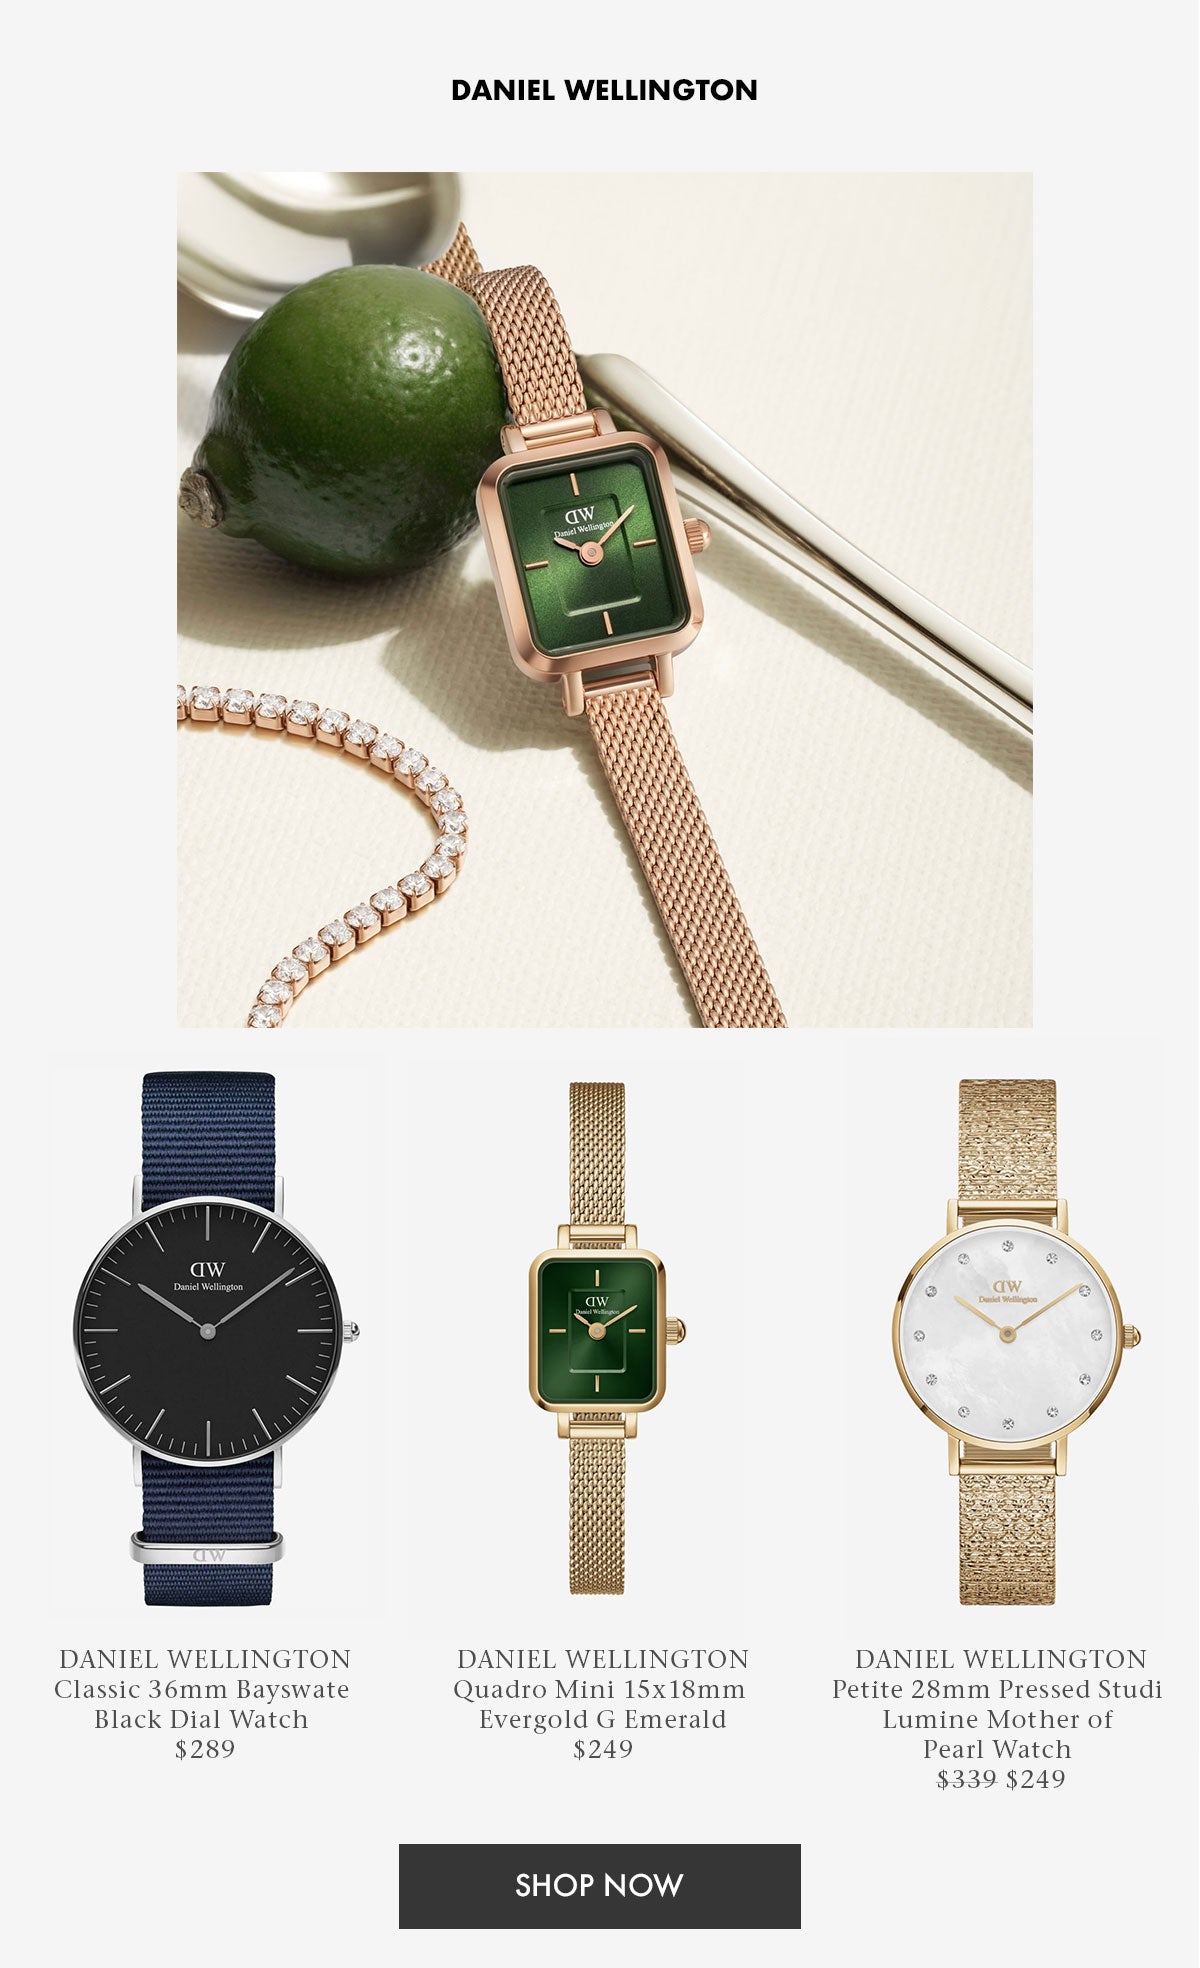 New from Daniel Wellington Watches